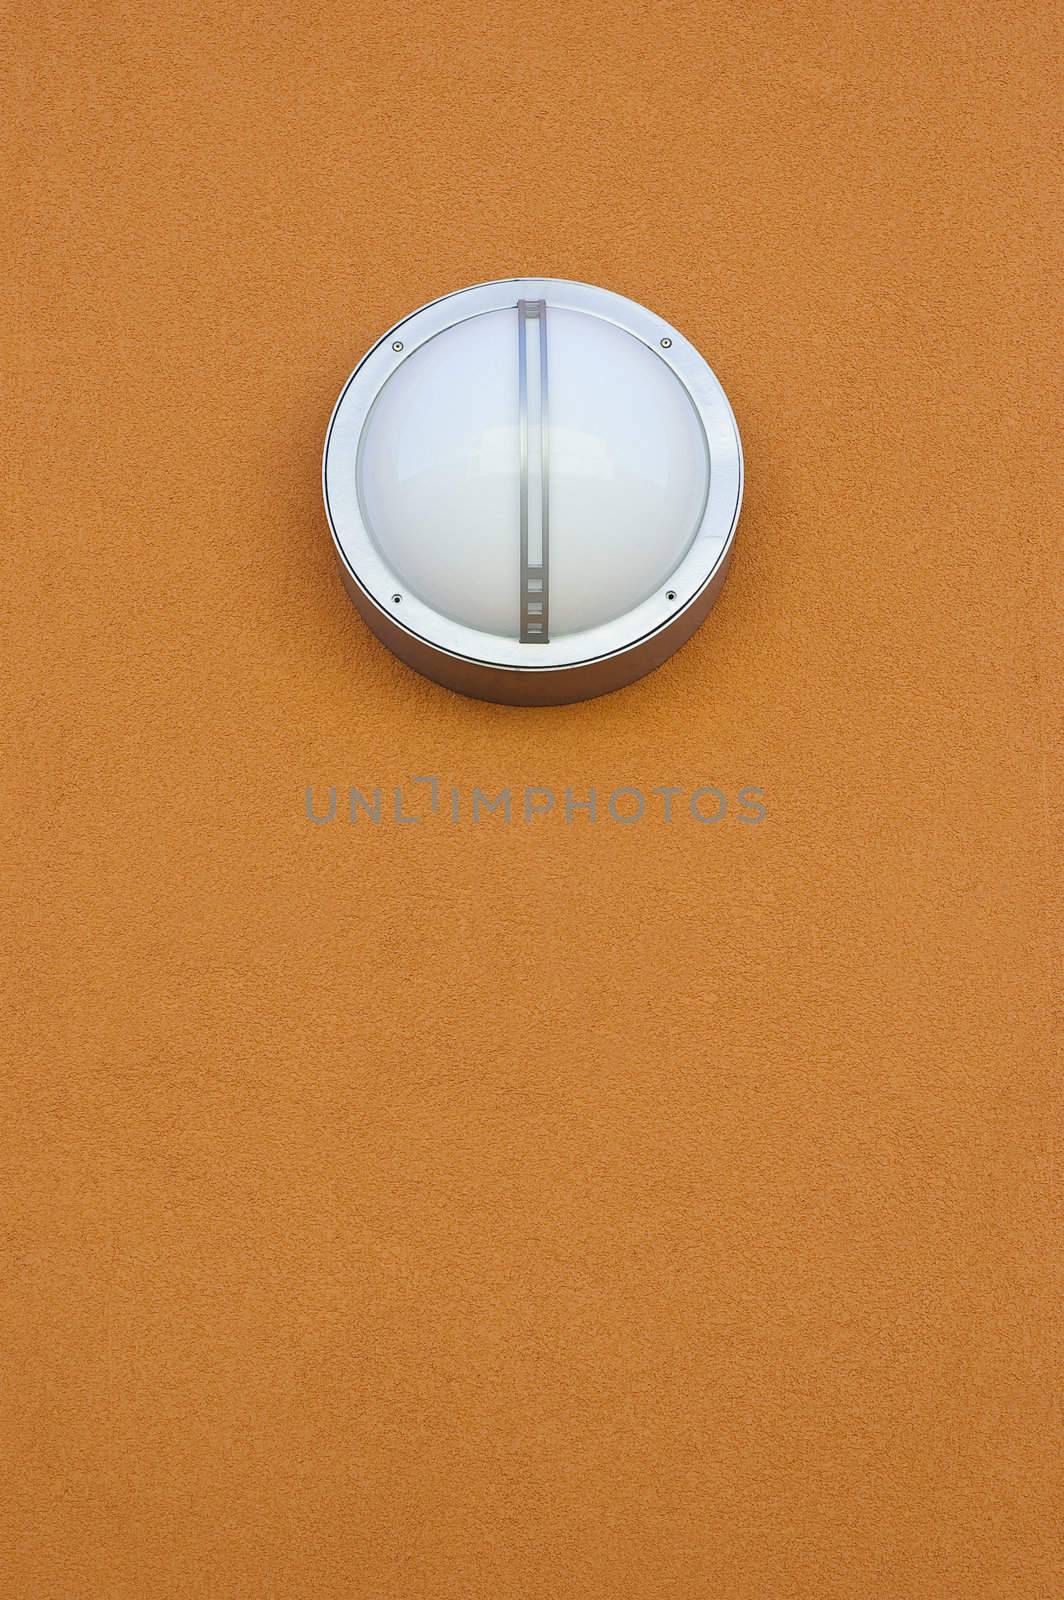 Round white wall fixture by ralarcon